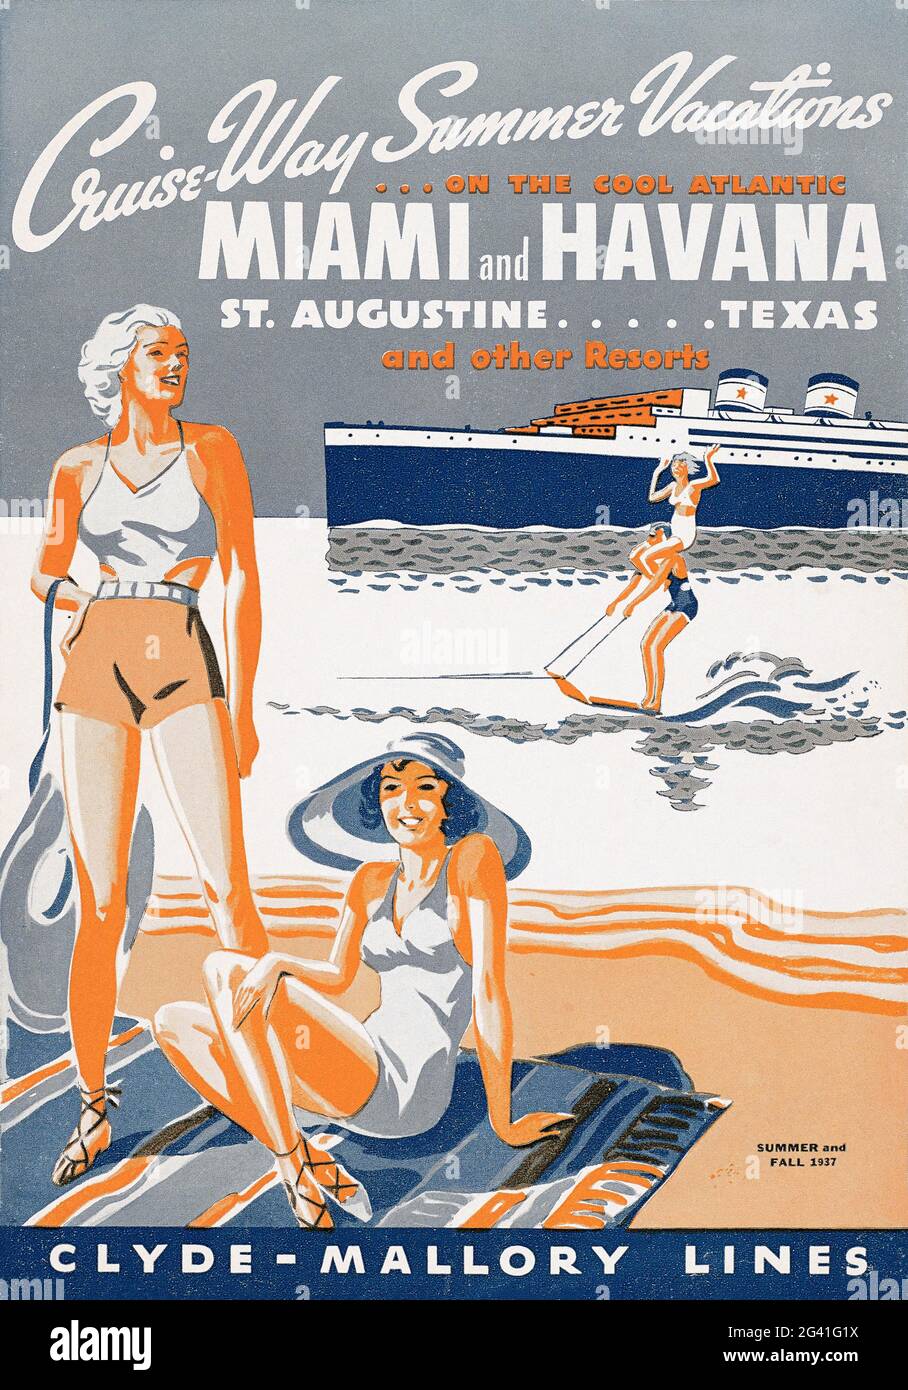 Cruise-Way Summer Vacations on the cool Atlantic. Miami and Havana, St. Augustine.....Texas. Artist unknown. Restored vintage poster published in 1937 in the USA. Stock Photo